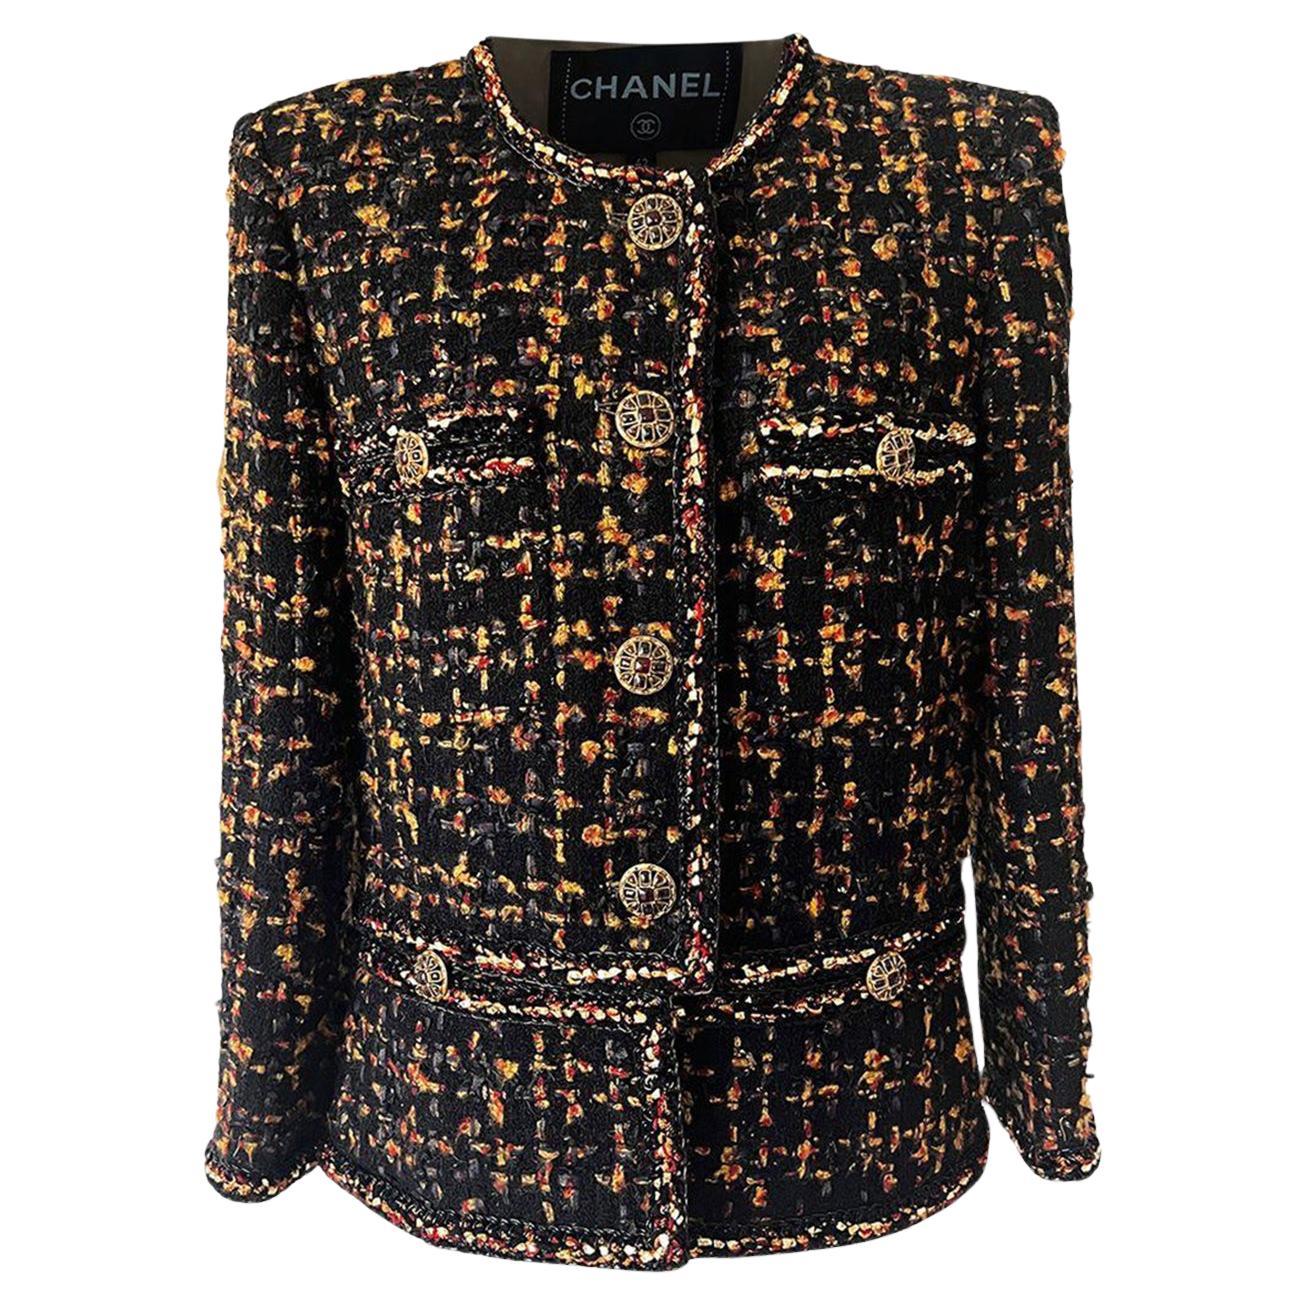 Chanel New 2019 Most Hunted Black Tweed Jacket For Sale